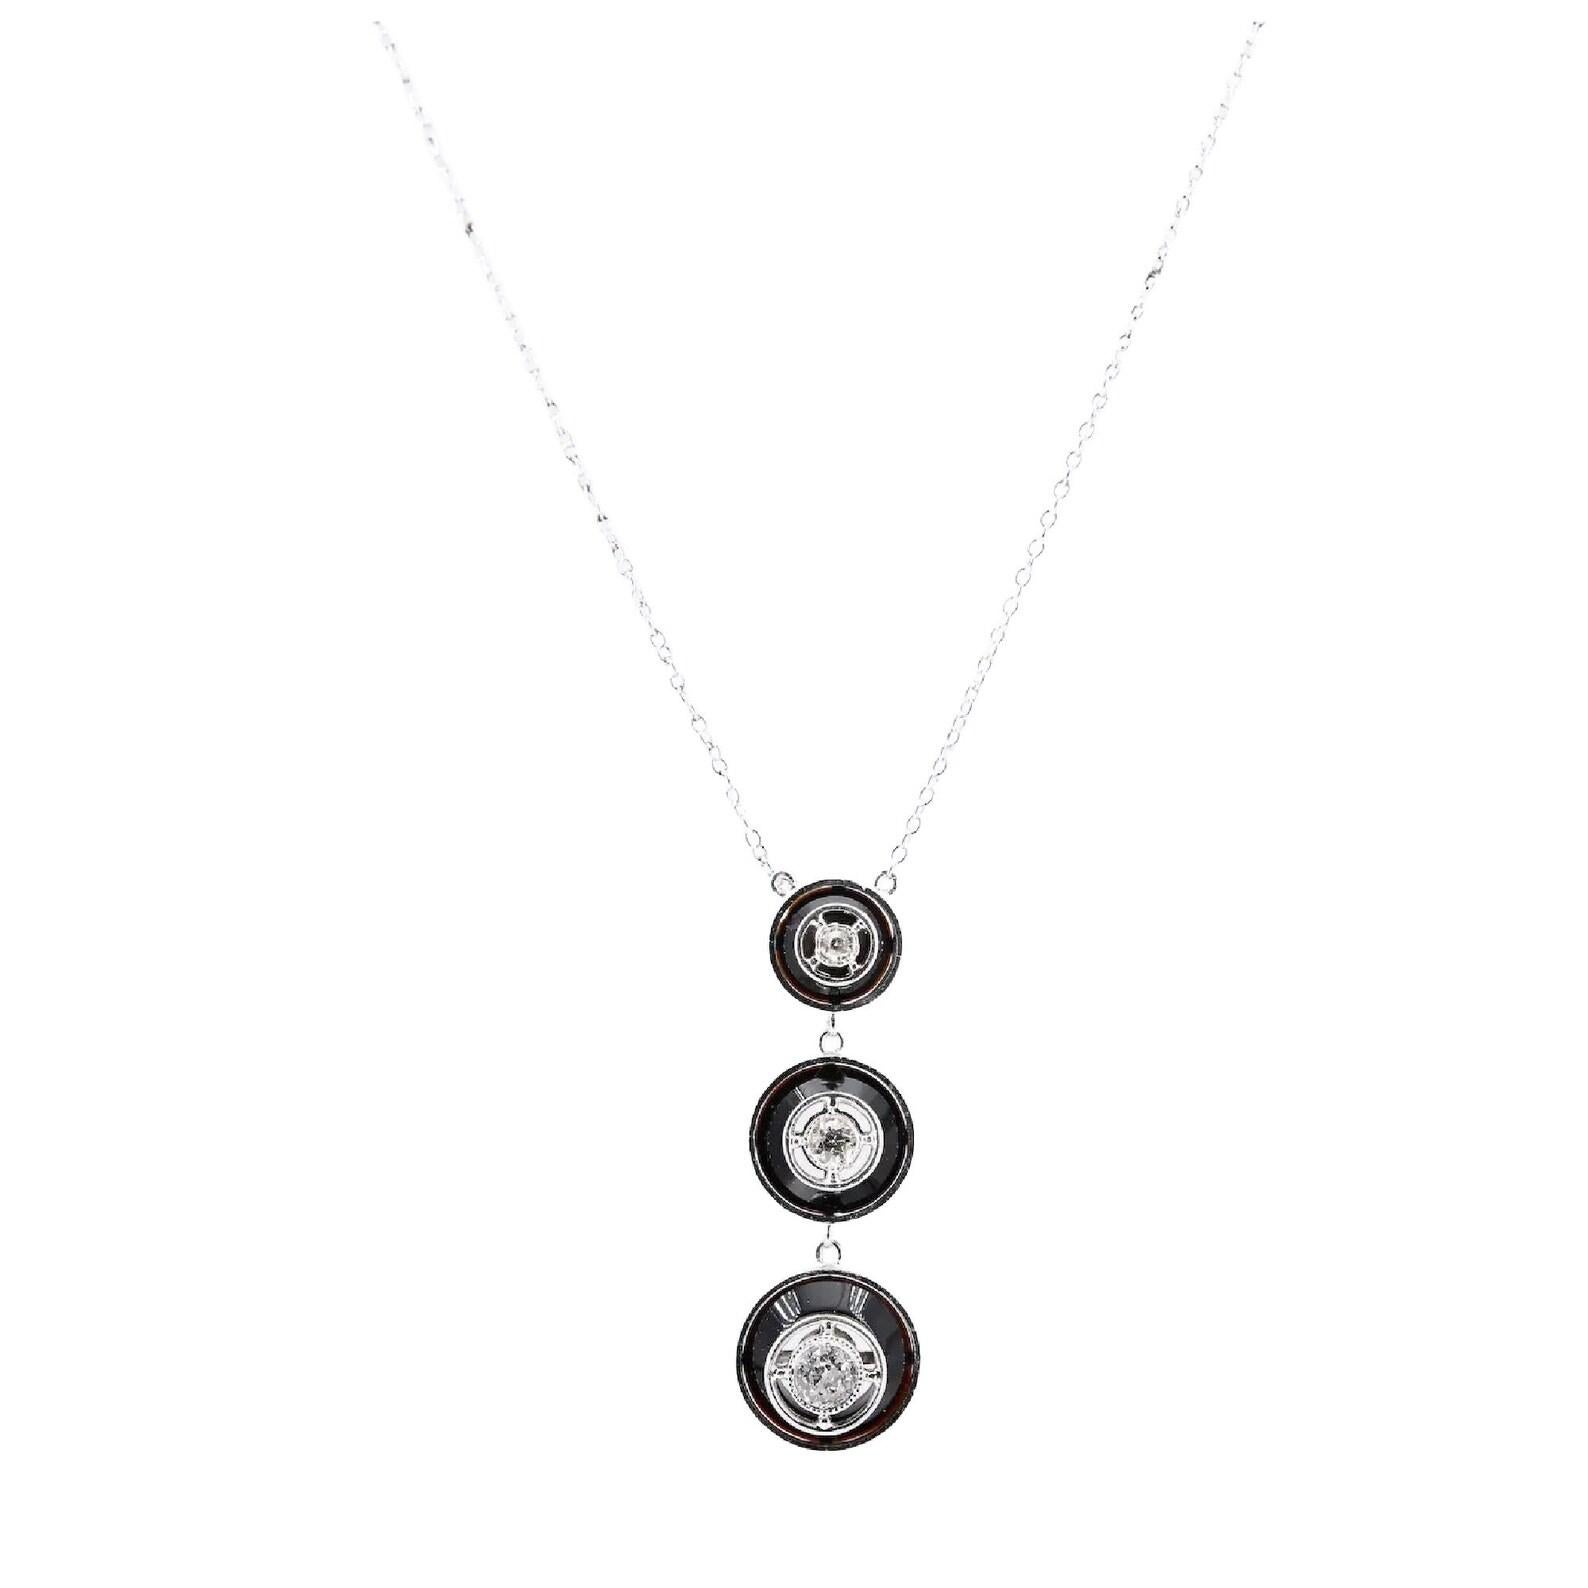 An Art Deco period diamond and onyx journey style target necklace in platinum.

Centered by three graduated diamonds set in miligrain beaded platinum bezels against a backdrop of polished black onyx.

The diamonds weighing 0.05, 0.10 and 0.25 carats